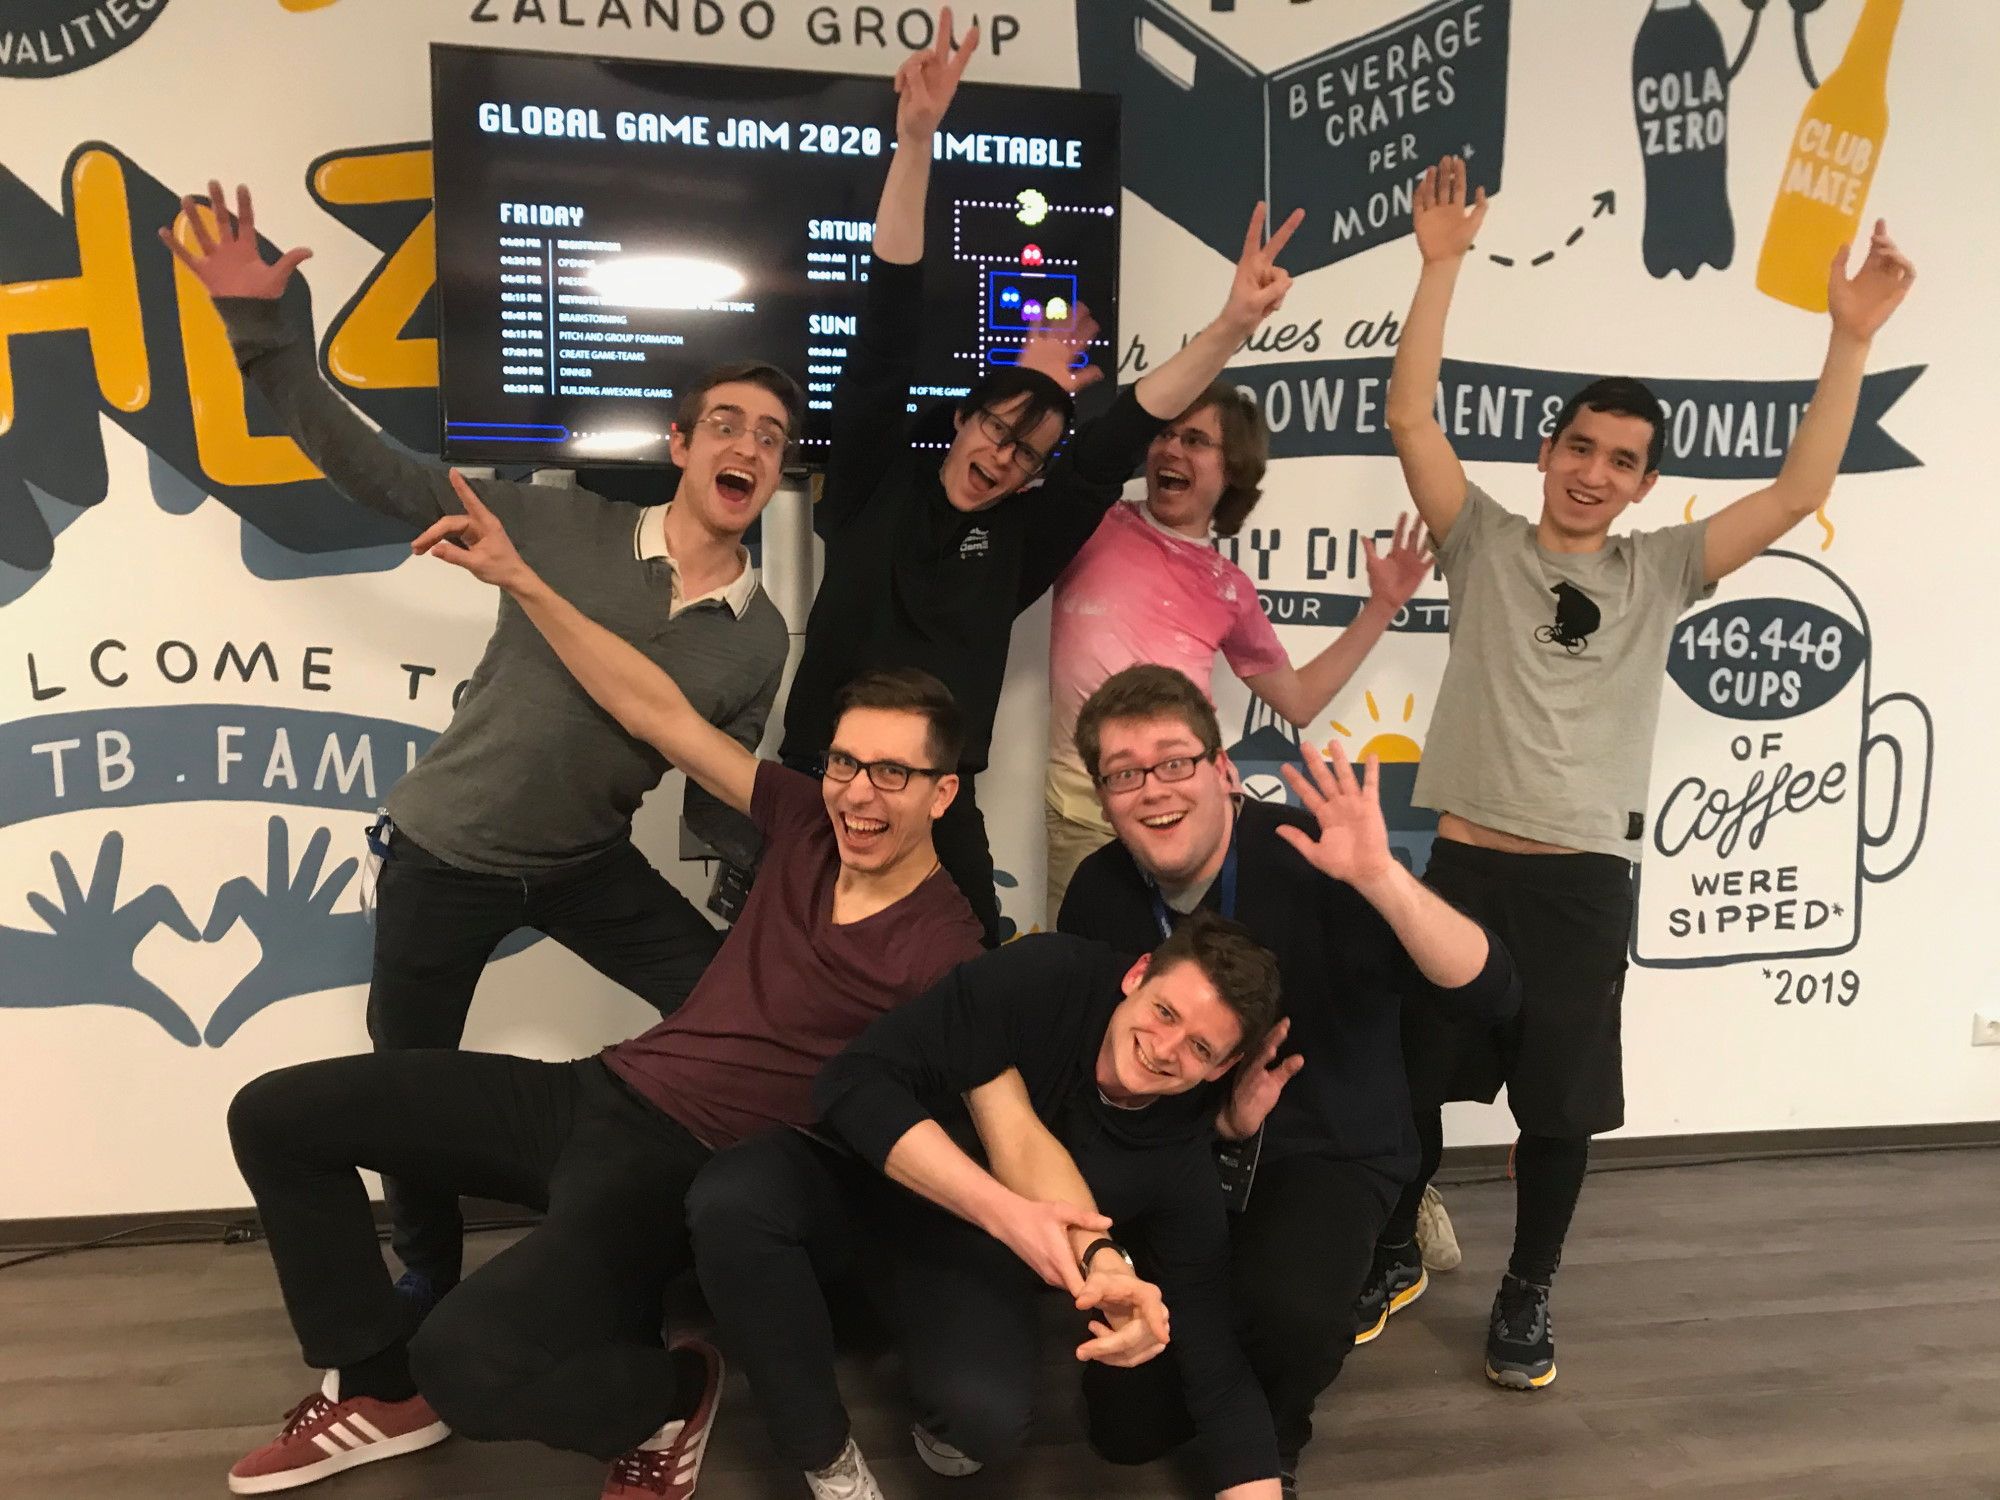 Gruppenfoto des Teams 'Quick and Dirty' beim Global Game Jam 2020 in Ansbach. 